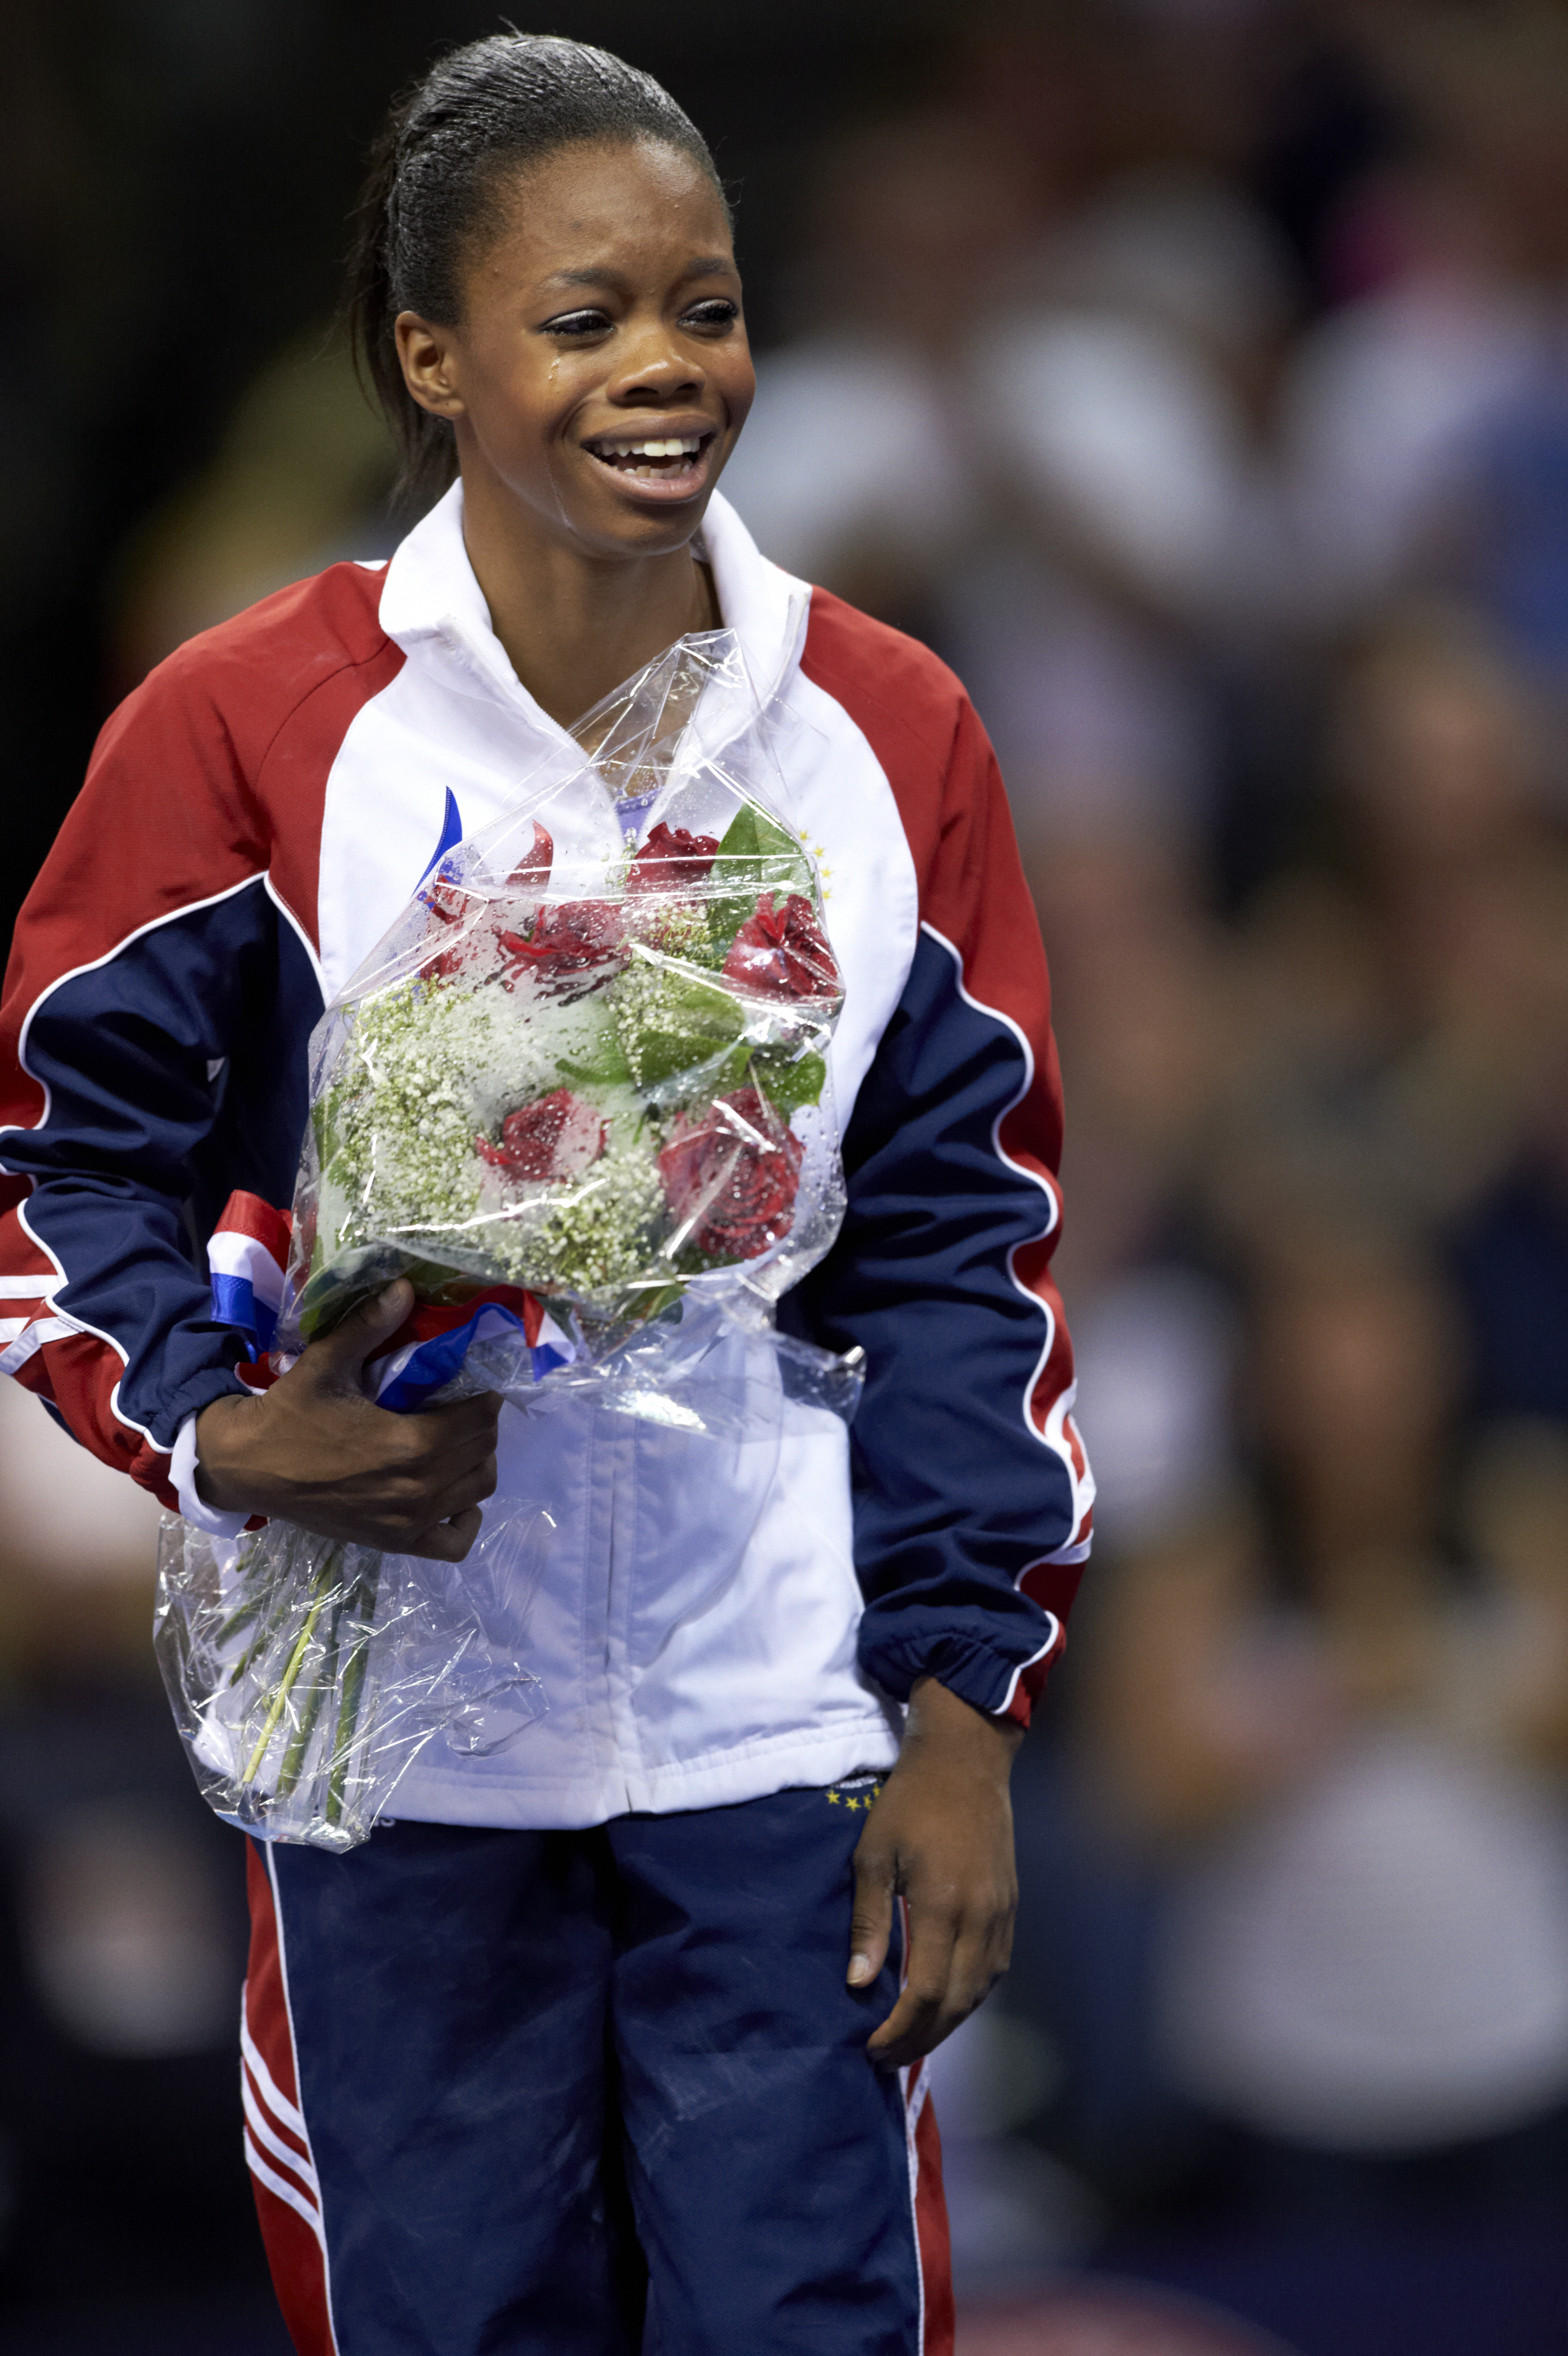 Gabrielle Douglas victorious with floral bouquet after Women's competition at HP Pavilion on July 1, 2012. | Source: Getty Images